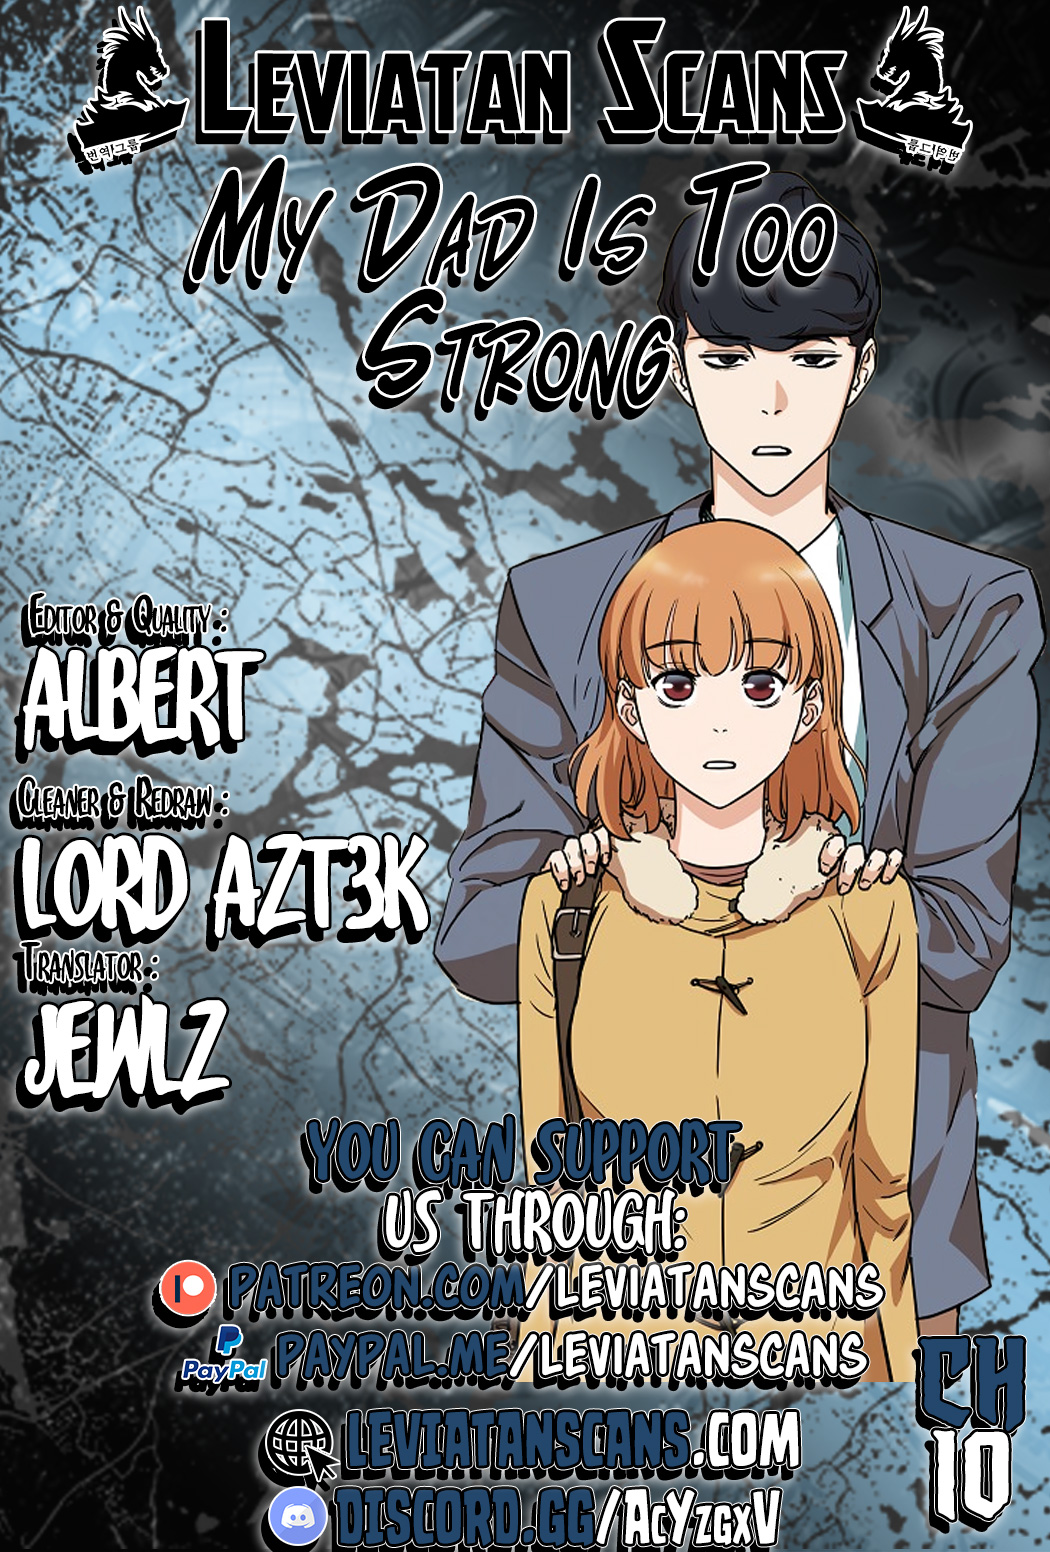 My Dad is Too Strong - Chapter 2589 - Image 1